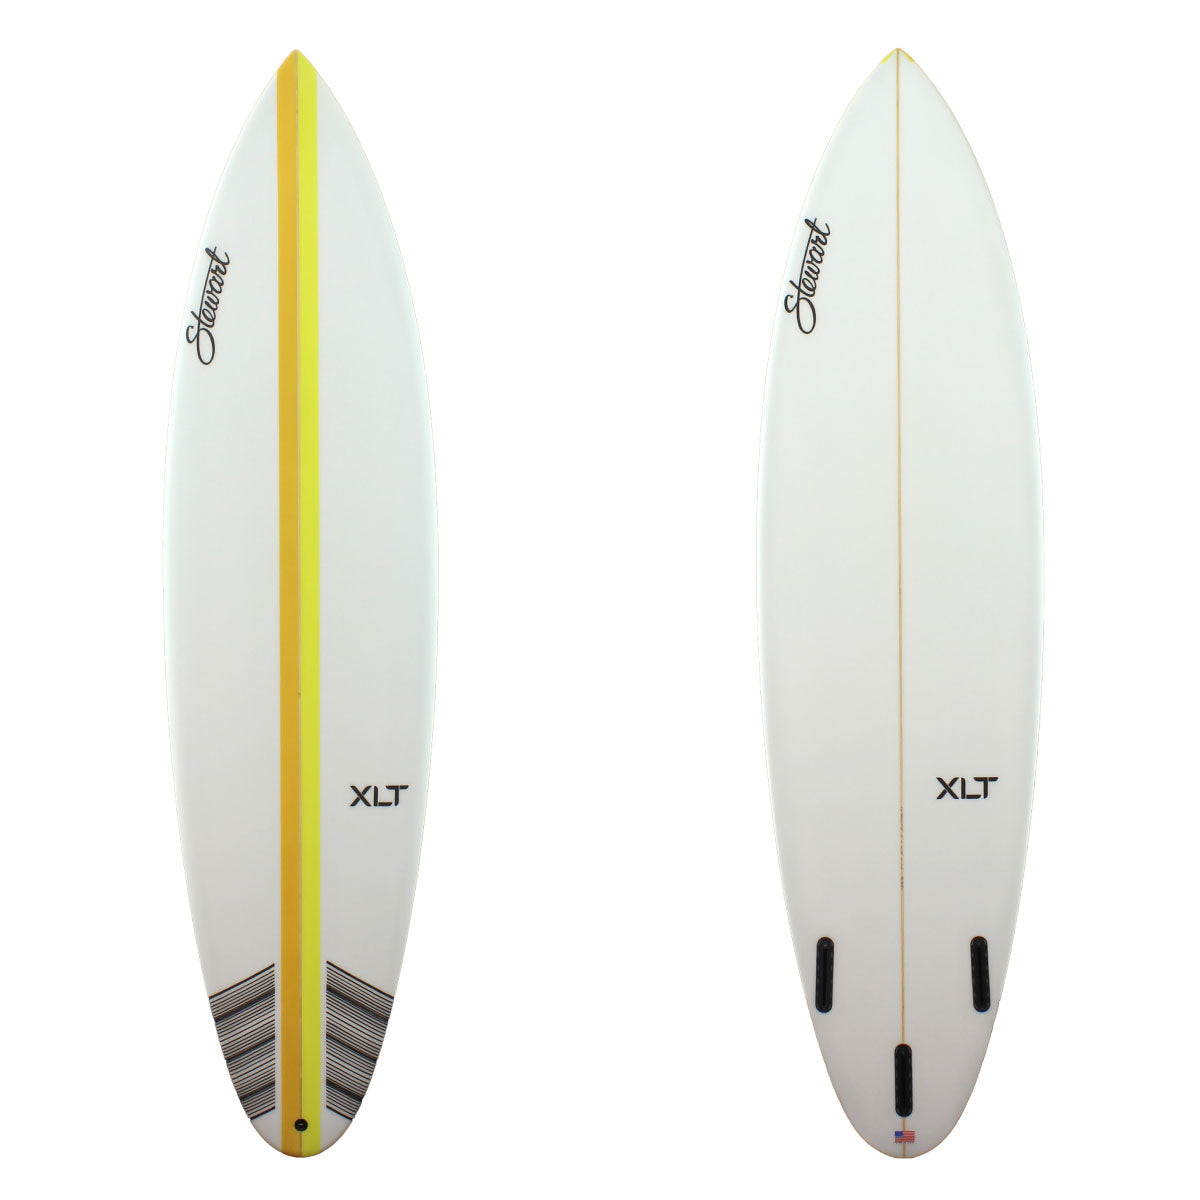 Stewart Surfboards 7'2" XLT shortboard with a mustard and a light yellow stripe on deck